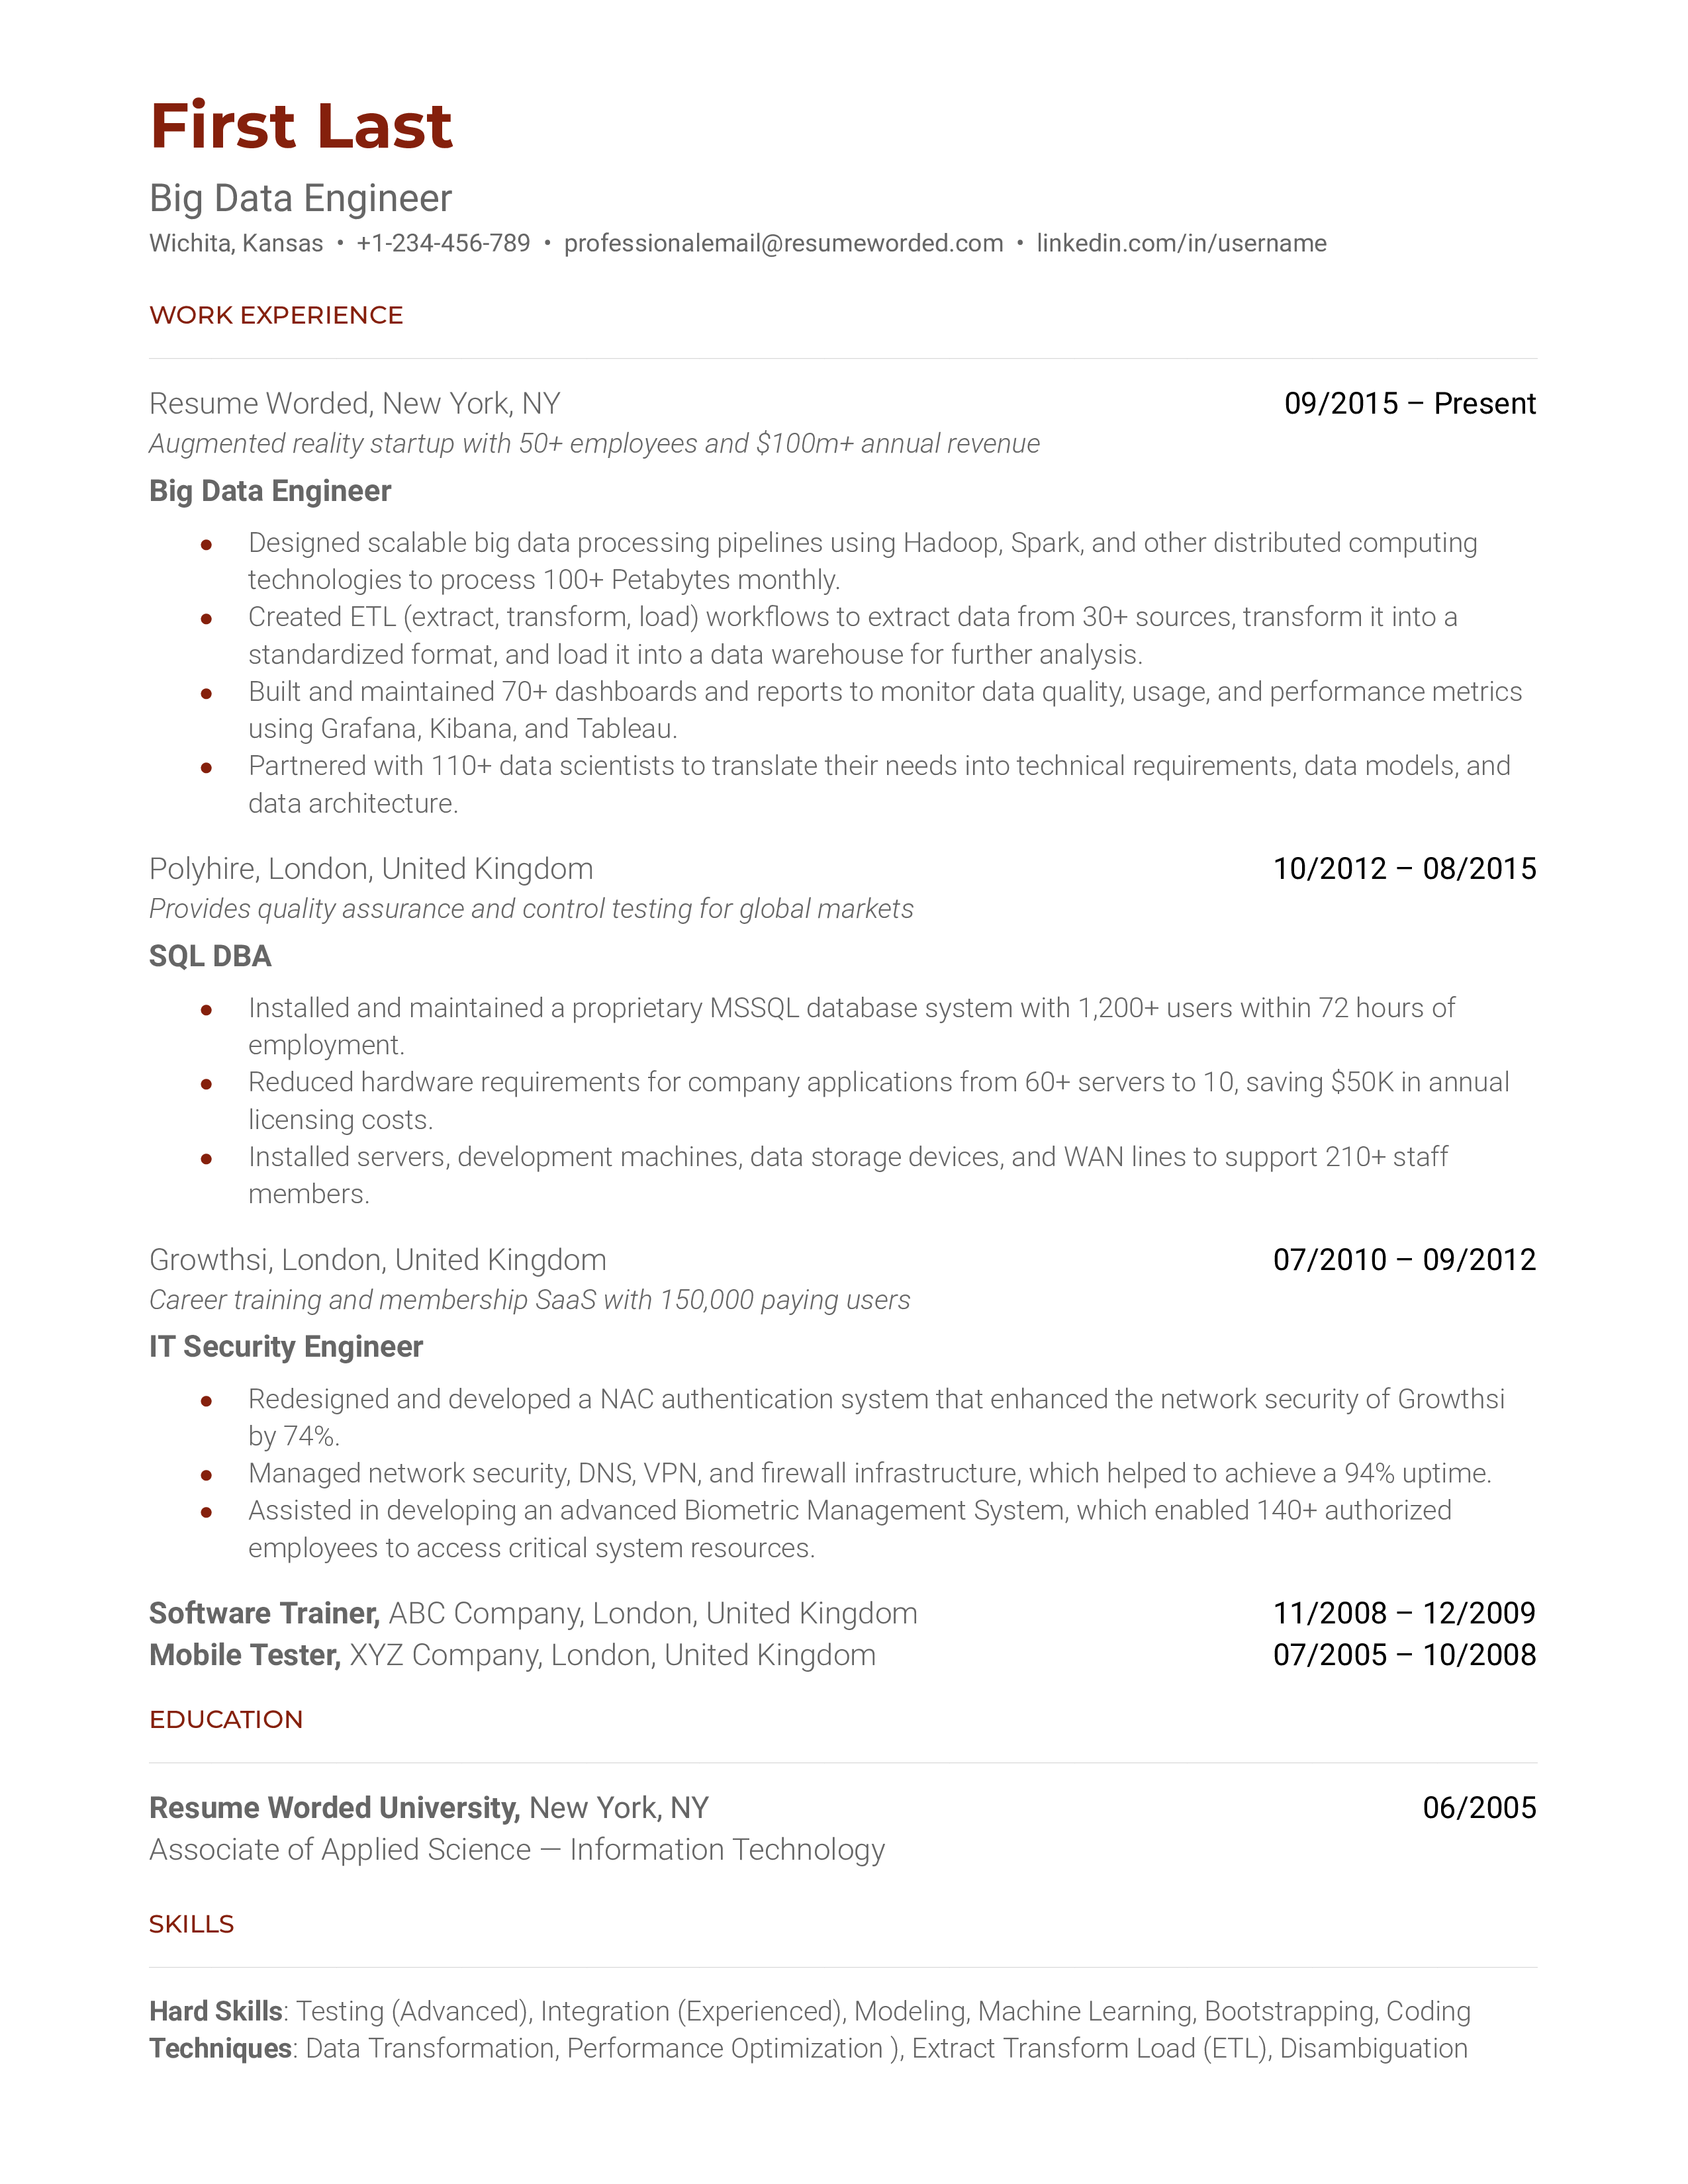 A screenshot of a Big Data Engineer's CV showcasing technical skills and project experiences.